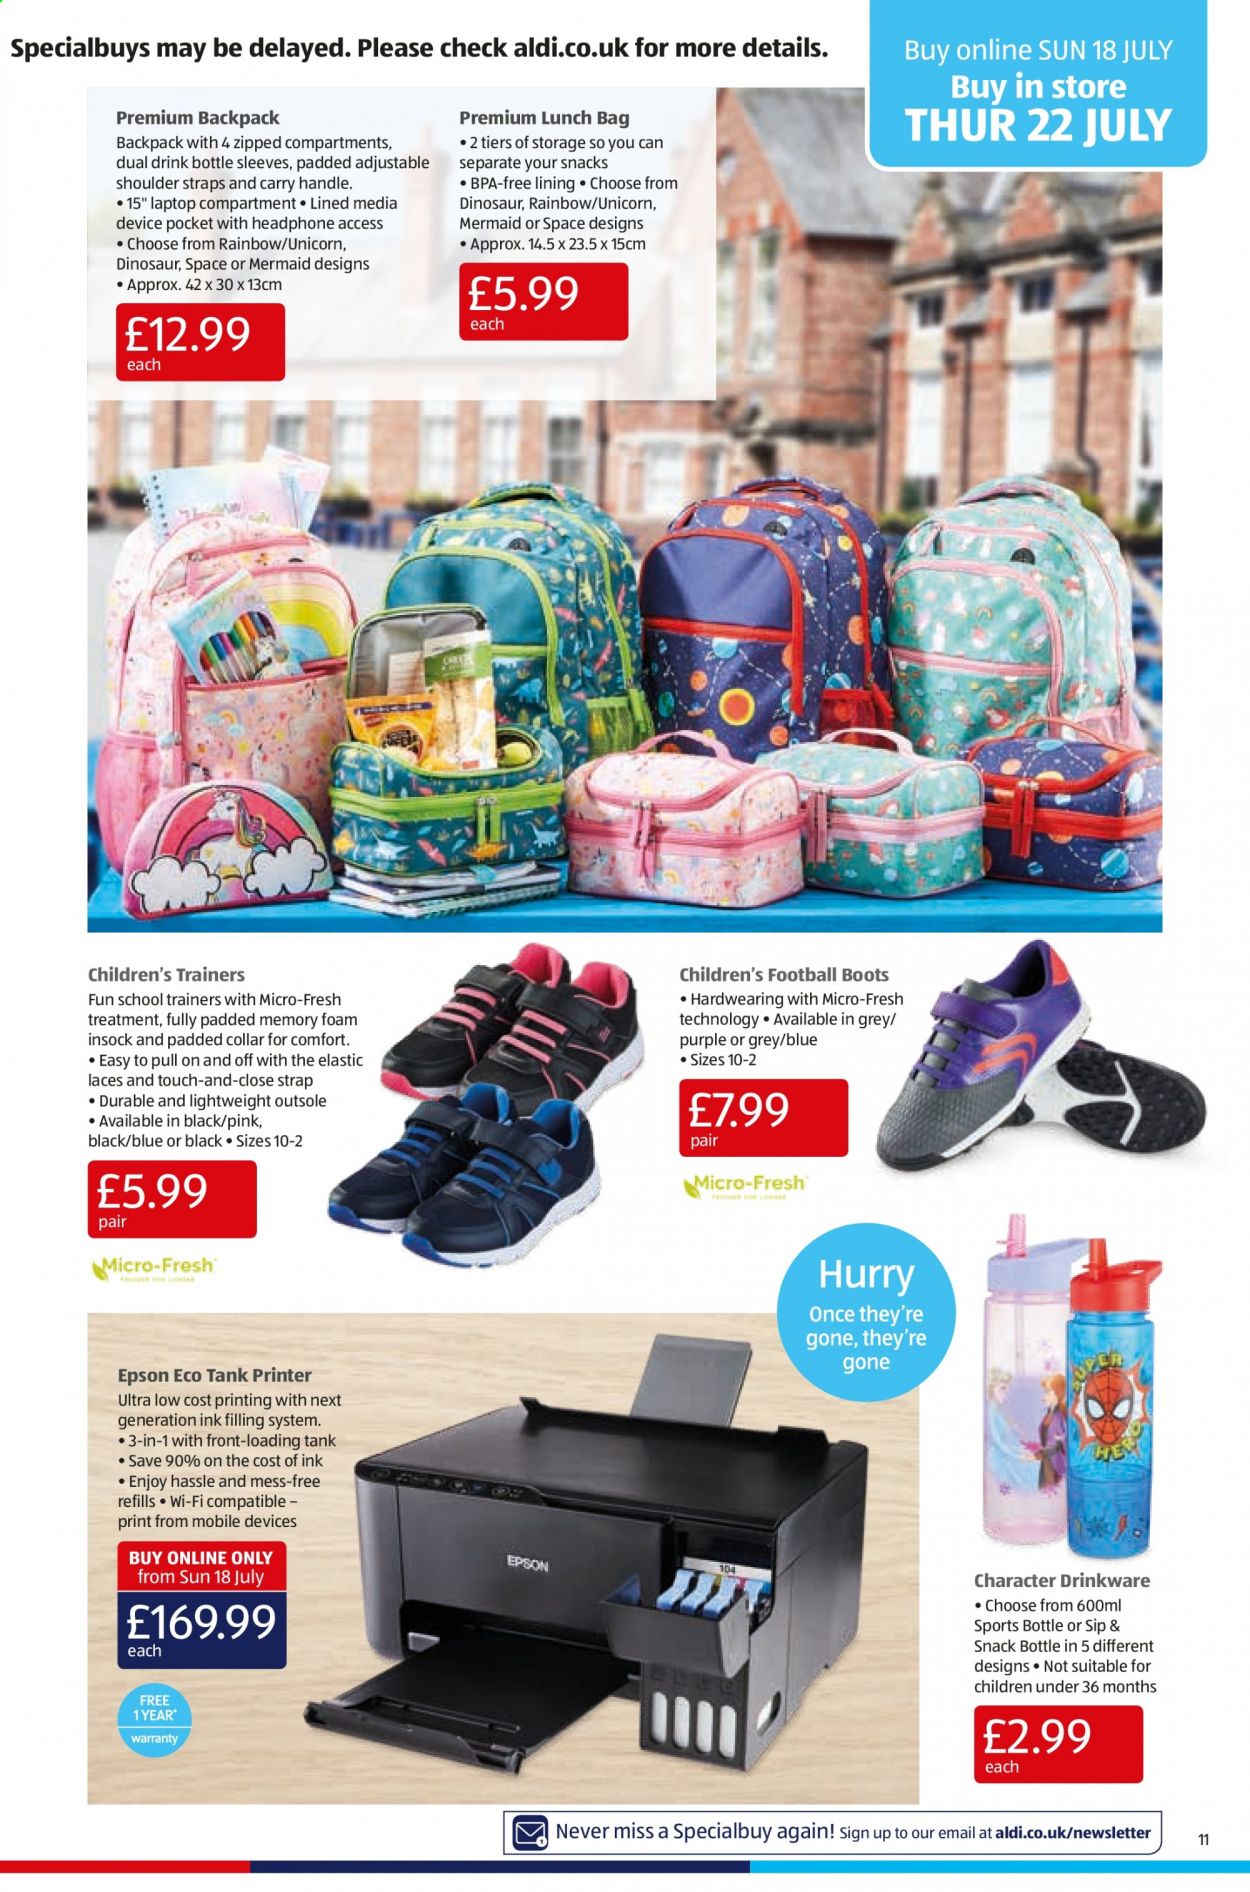 thumbnail - Aldi offer  - 18/07/2021 - 25/07/2021 - Sales products - boots, trainers, snack, drinkware, travel bottle, drink bottle, tank, backpack, dinosaur. Page 11.